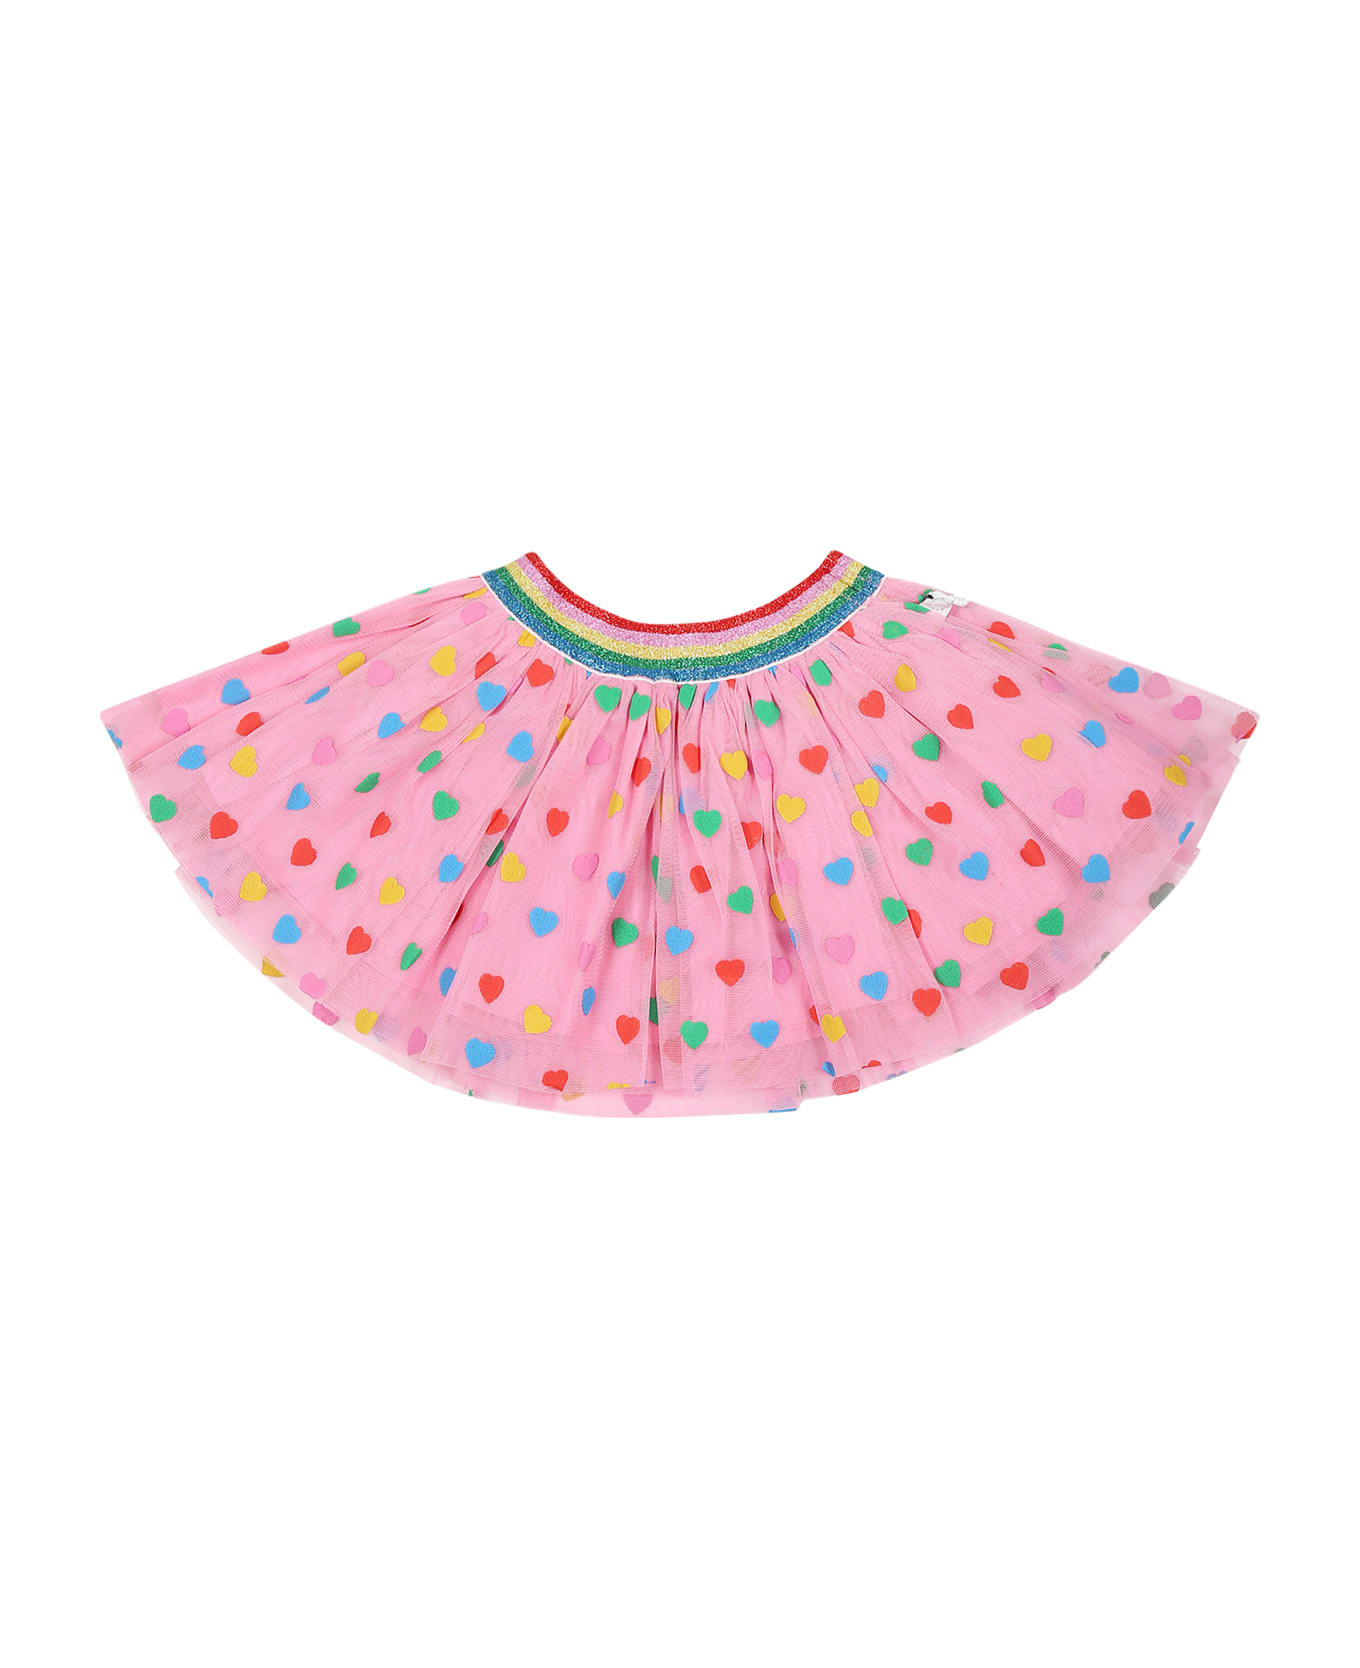 Stella McCartney Kids Pink Skirt For Baby Girl With Hearts - Pink ボトムス